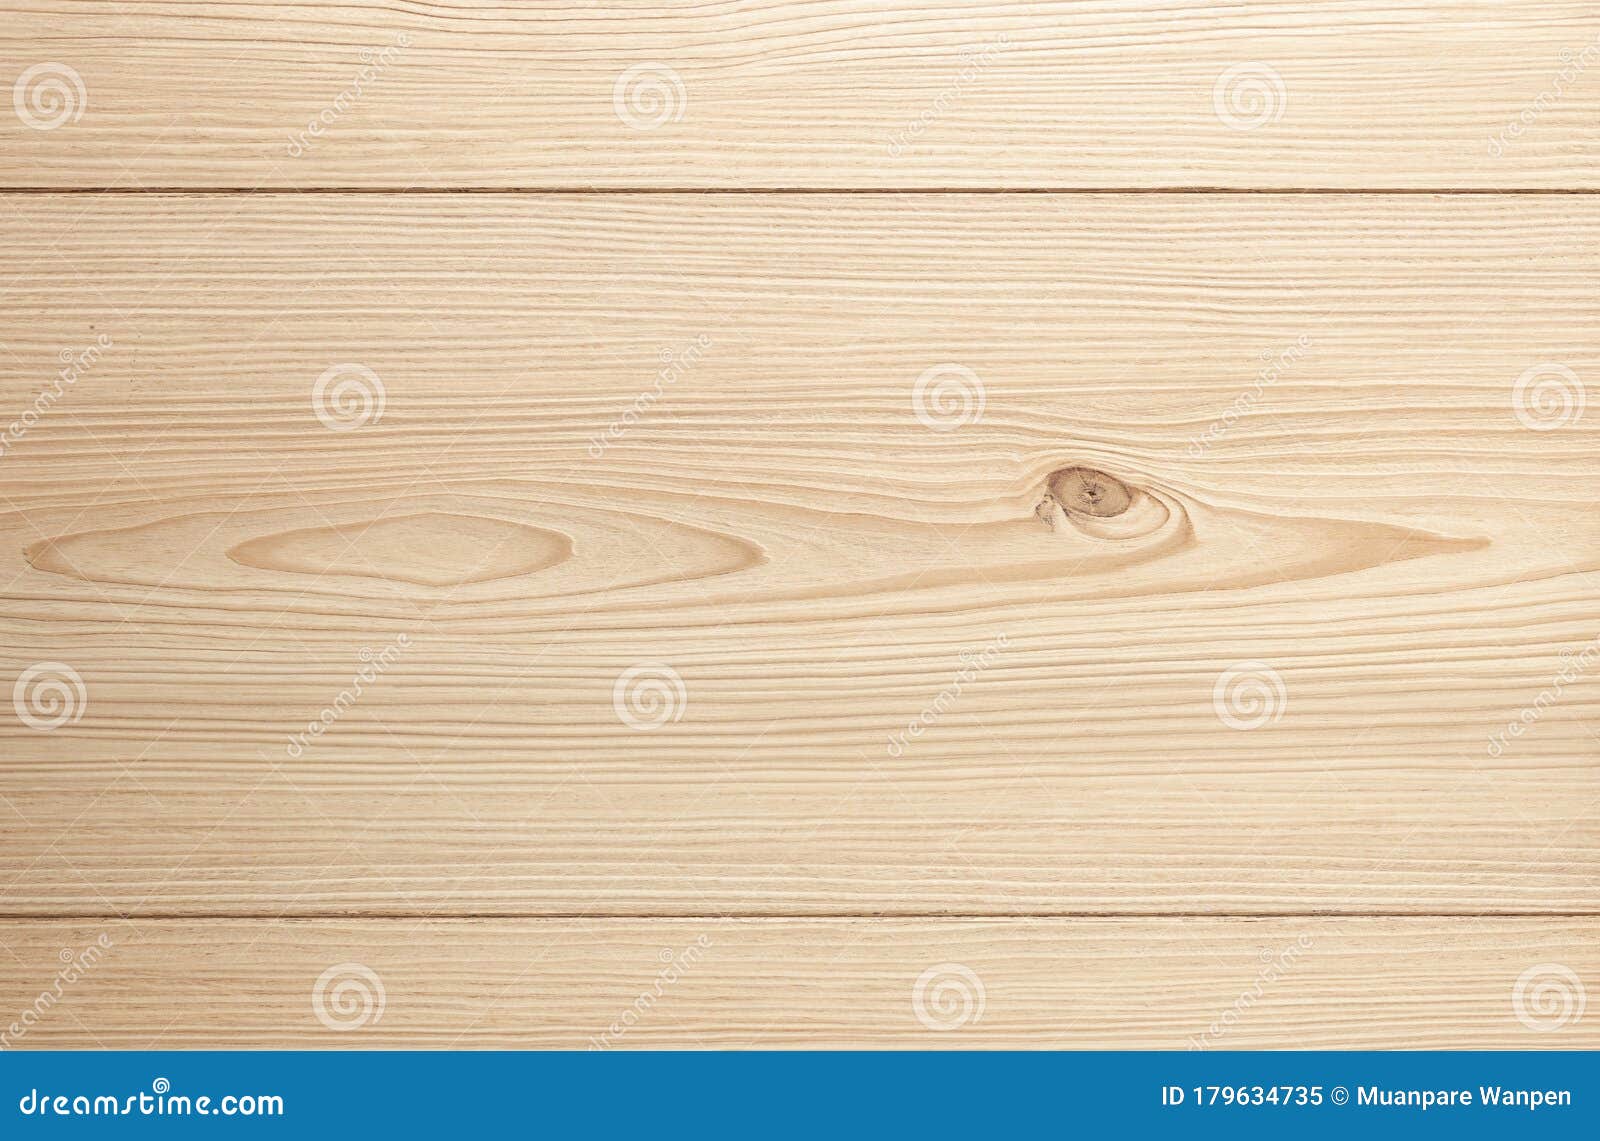 Wood Texture. Surface of Teak Wood Background for Design and Decoration  Stock Image - Image of sample, nature: 179634735